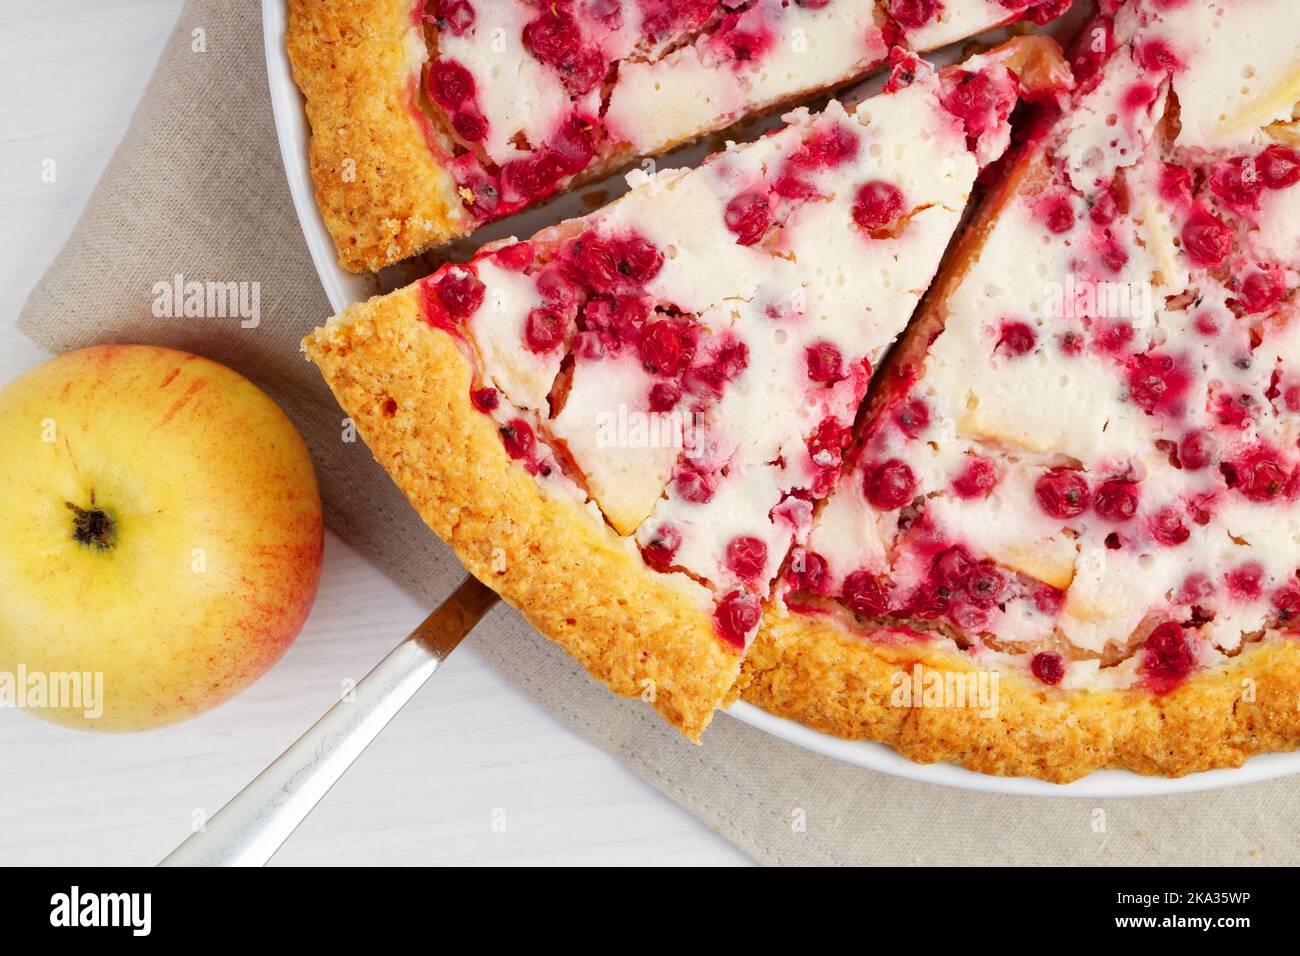 Closeup homemade apple and redcurrant pie on white wooden table. Top view. Stock Photo